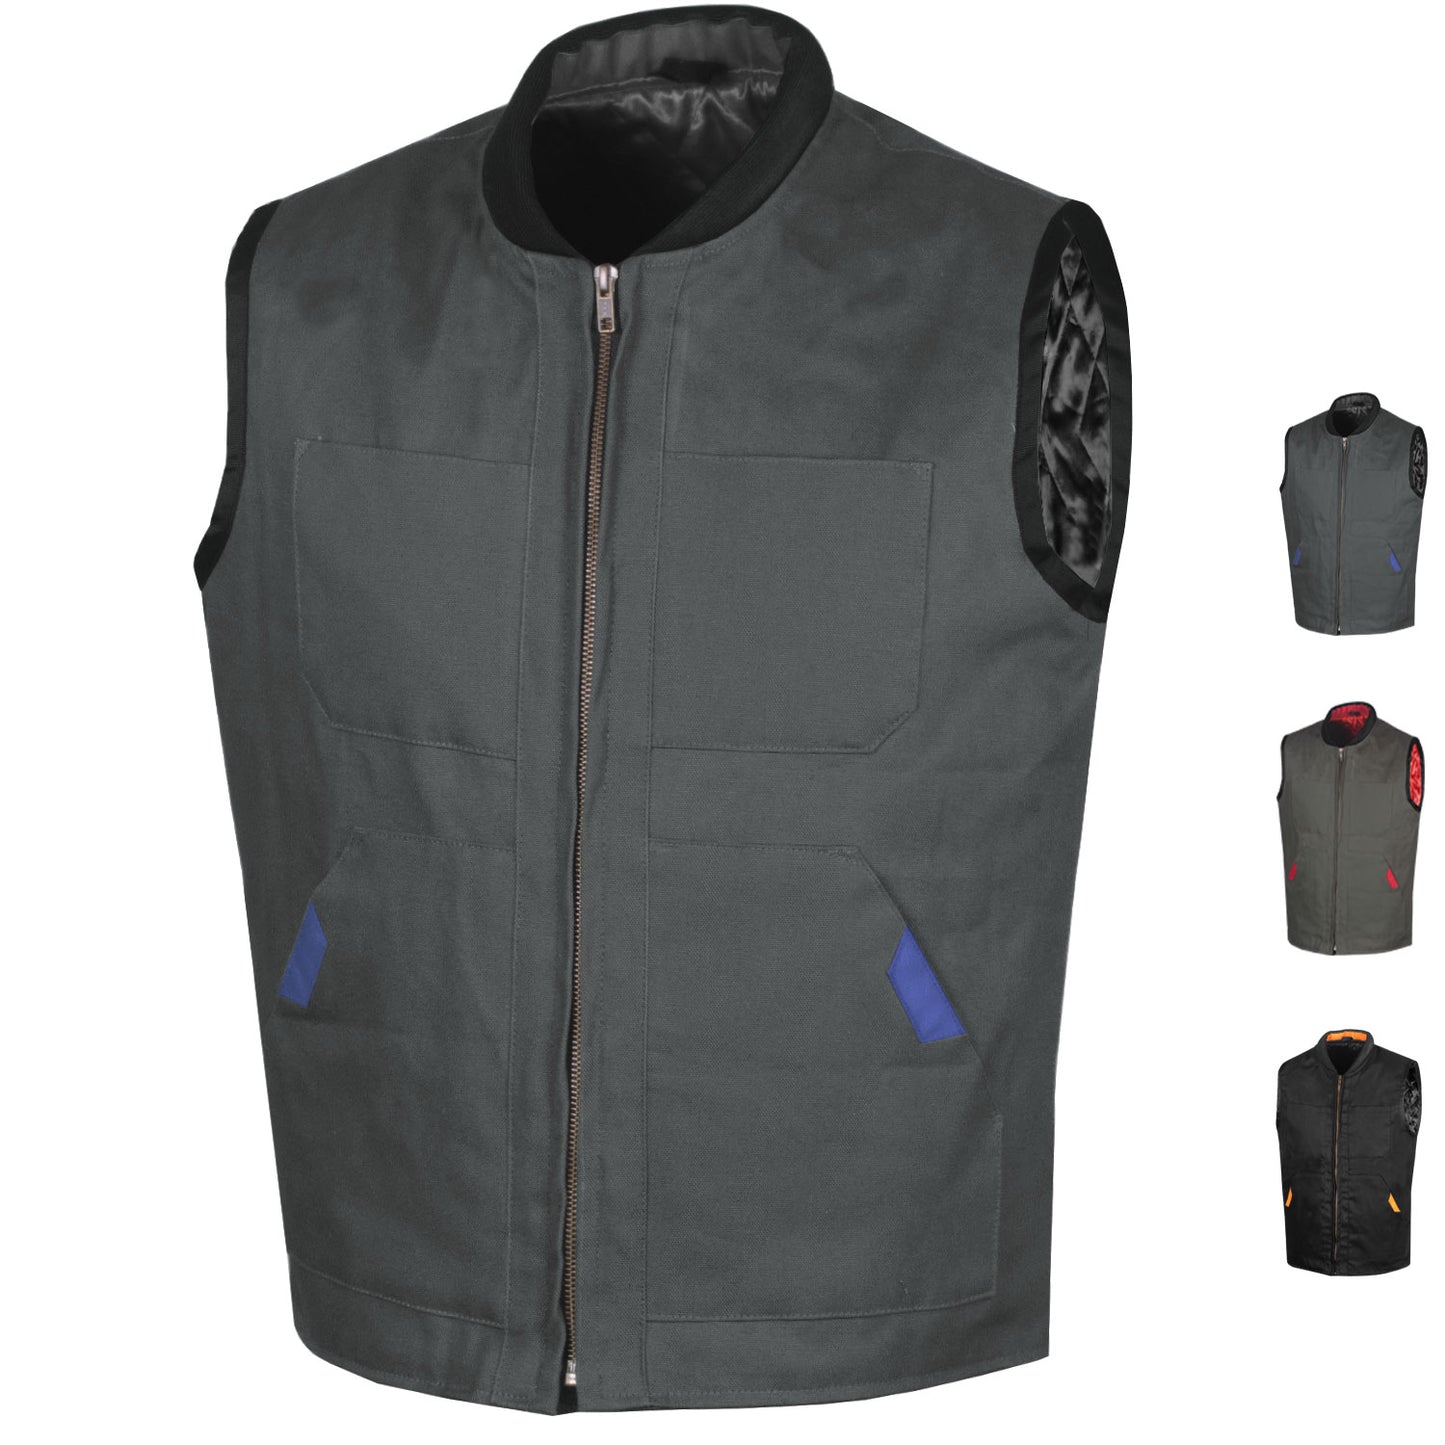 Jackets 4 Bikes Men's Dual Holsters Rugged Vest Concealed Carry Inside Pockets For Hunting Fishing Motorcycle and Outdoors Grey